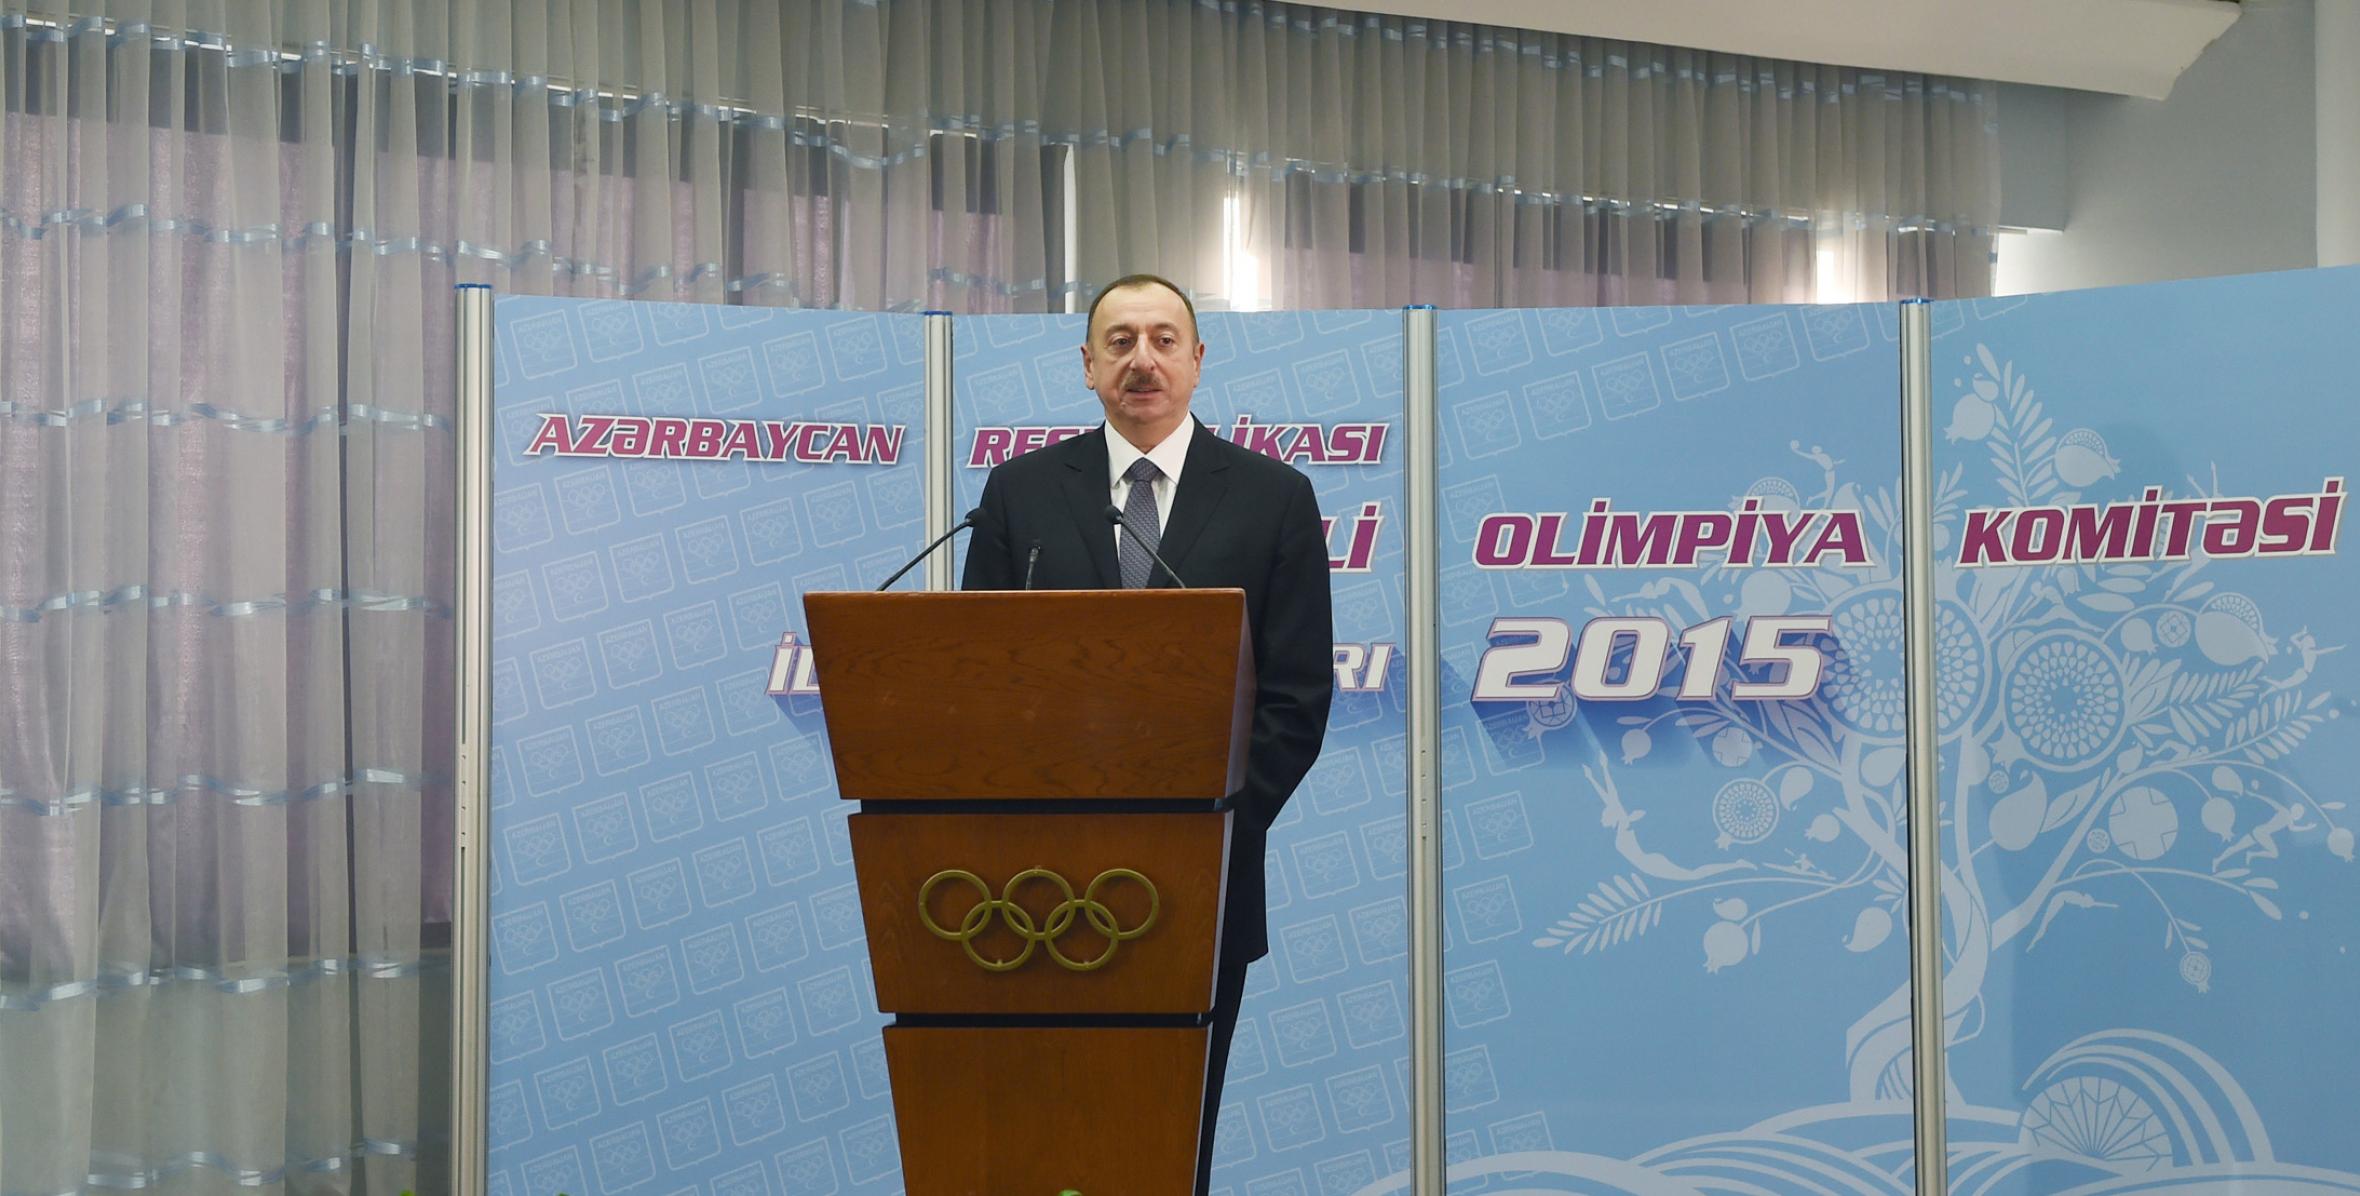 Ilham Aliyev attended a ceremony dedicated to sport results of 2015